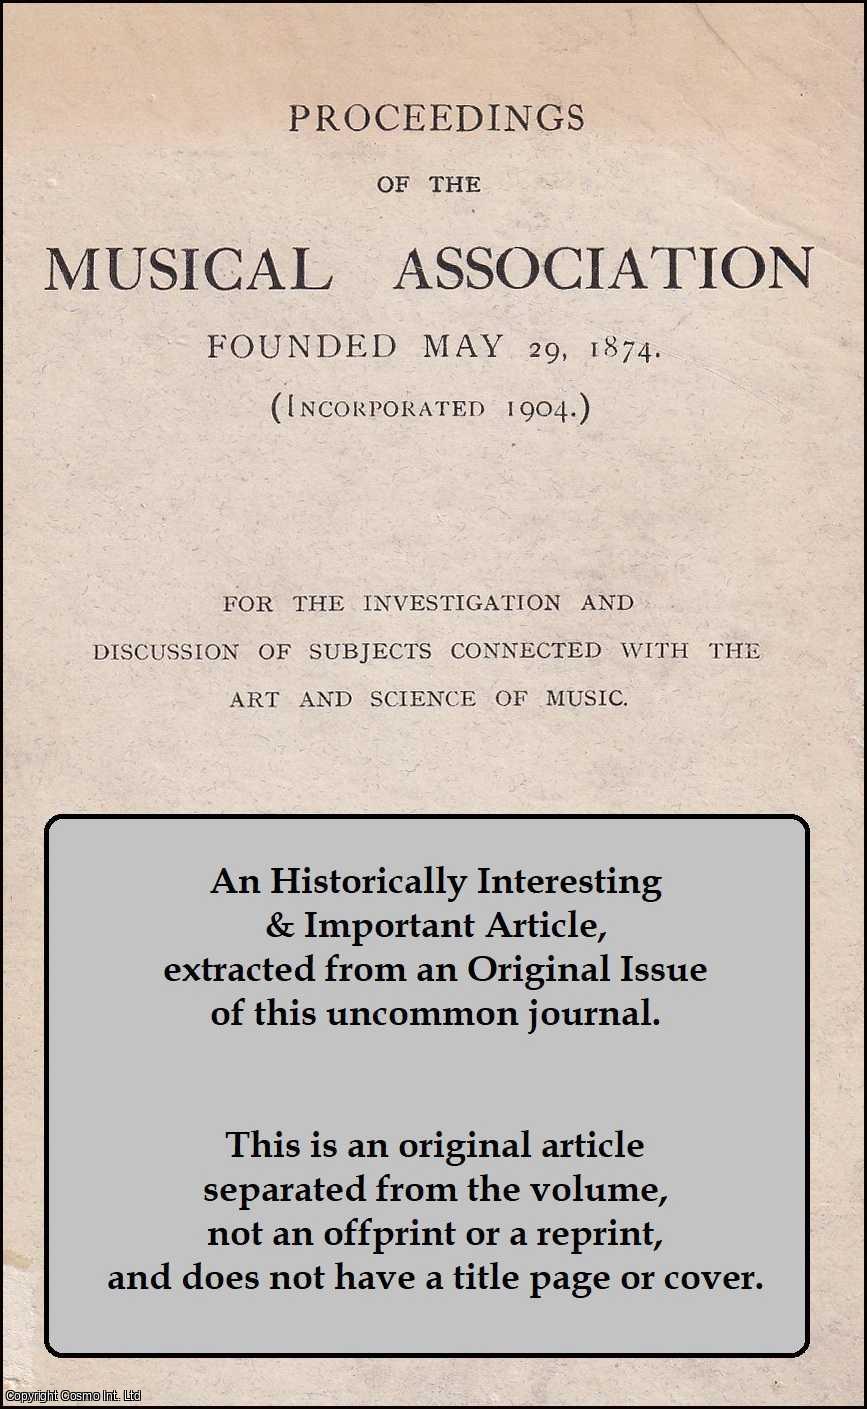 Charles Villiers Stanford - Some Recent Tendencies in Composition. An original article from The Proceedings of The Musical Association, 1921.